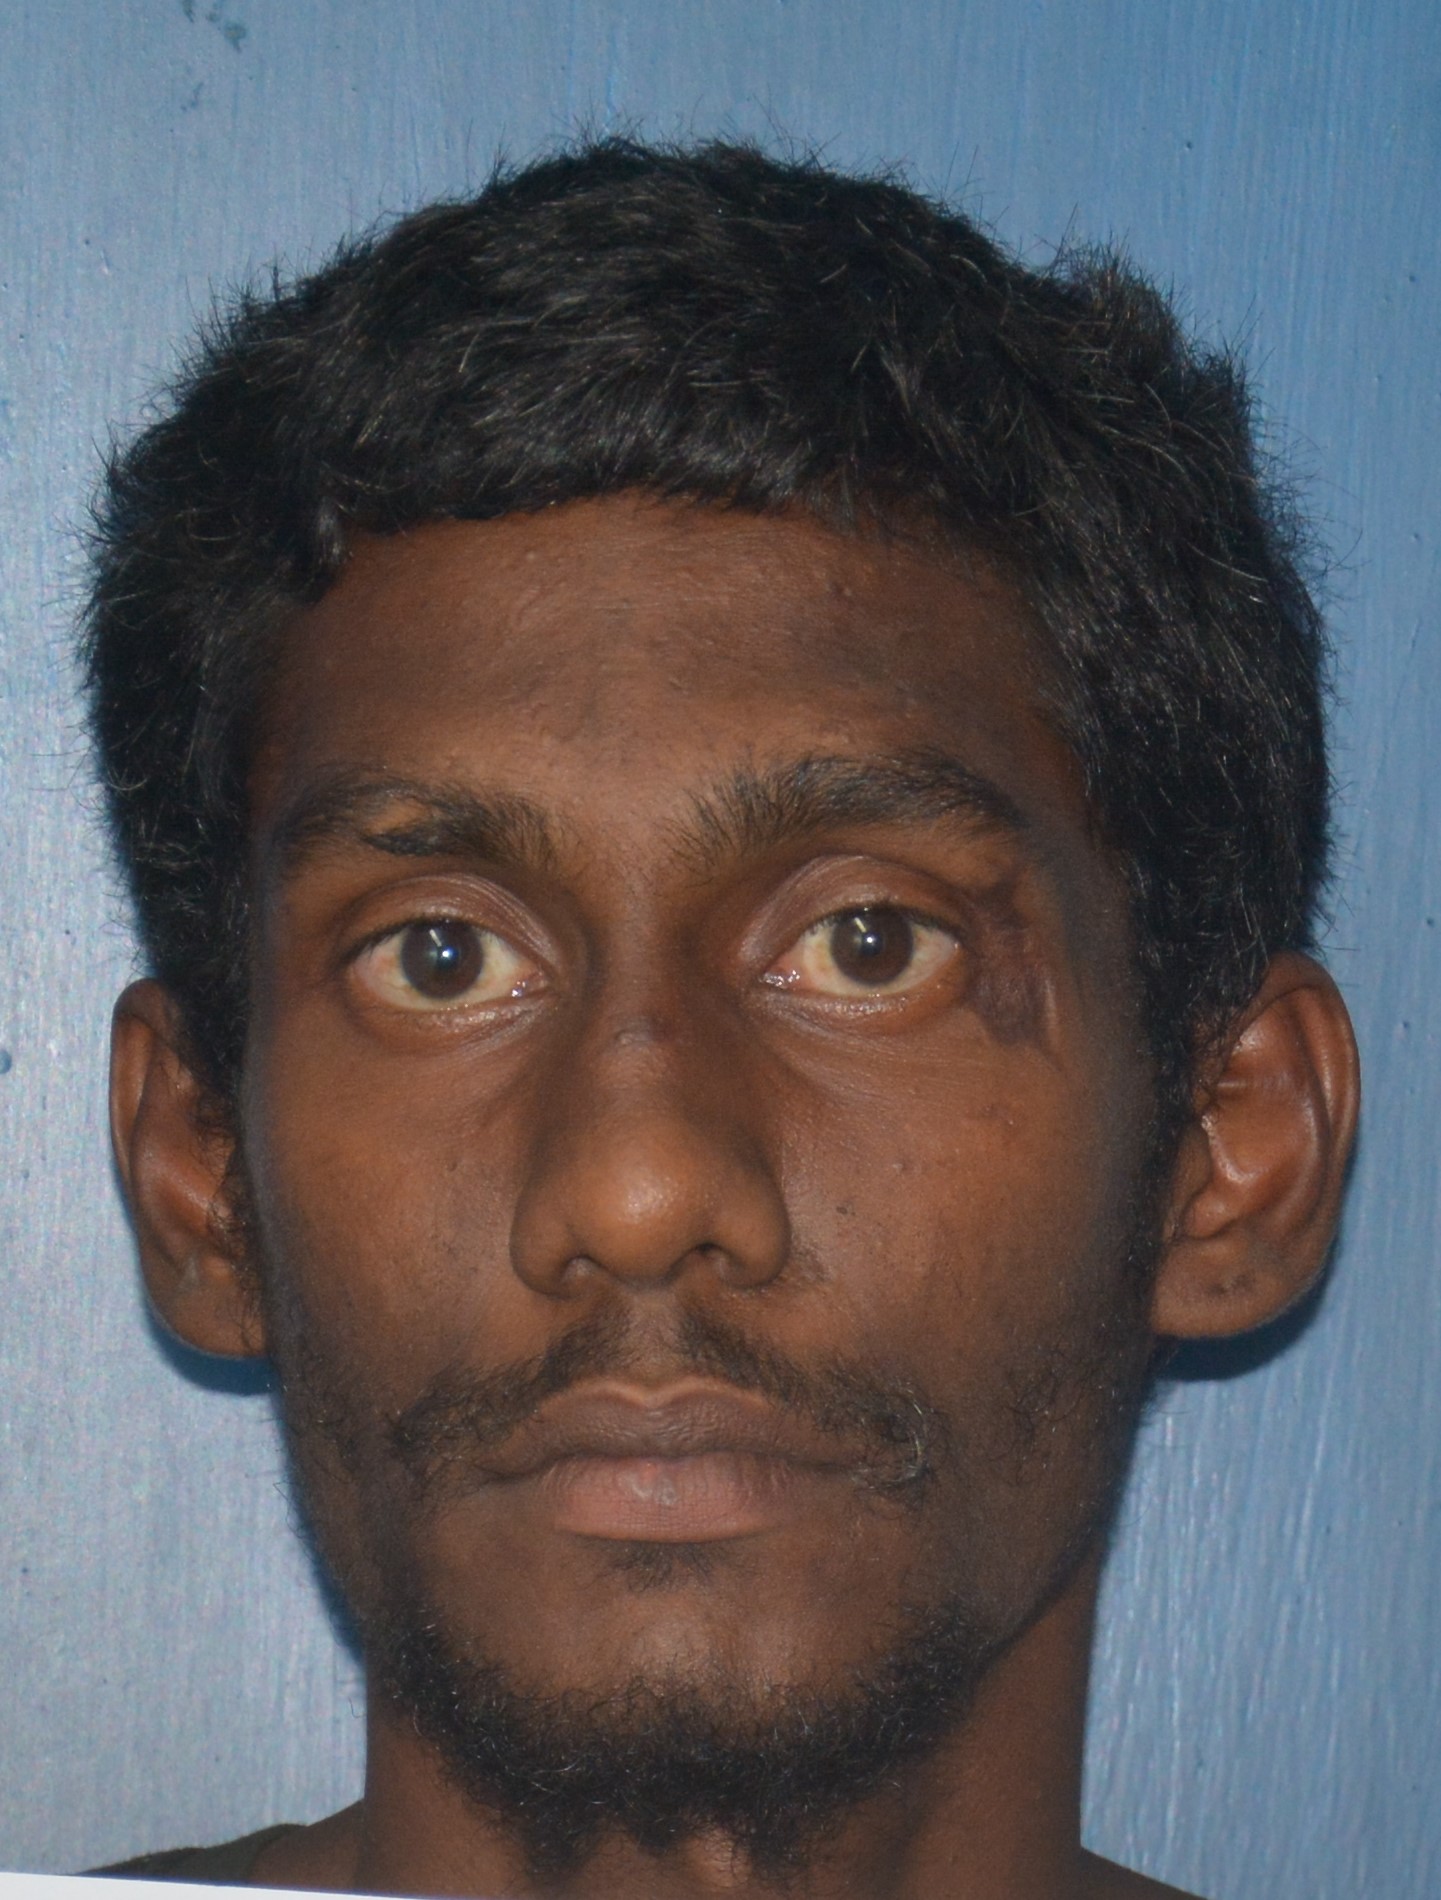 New Grant labourer charged with breaking into a roti shop